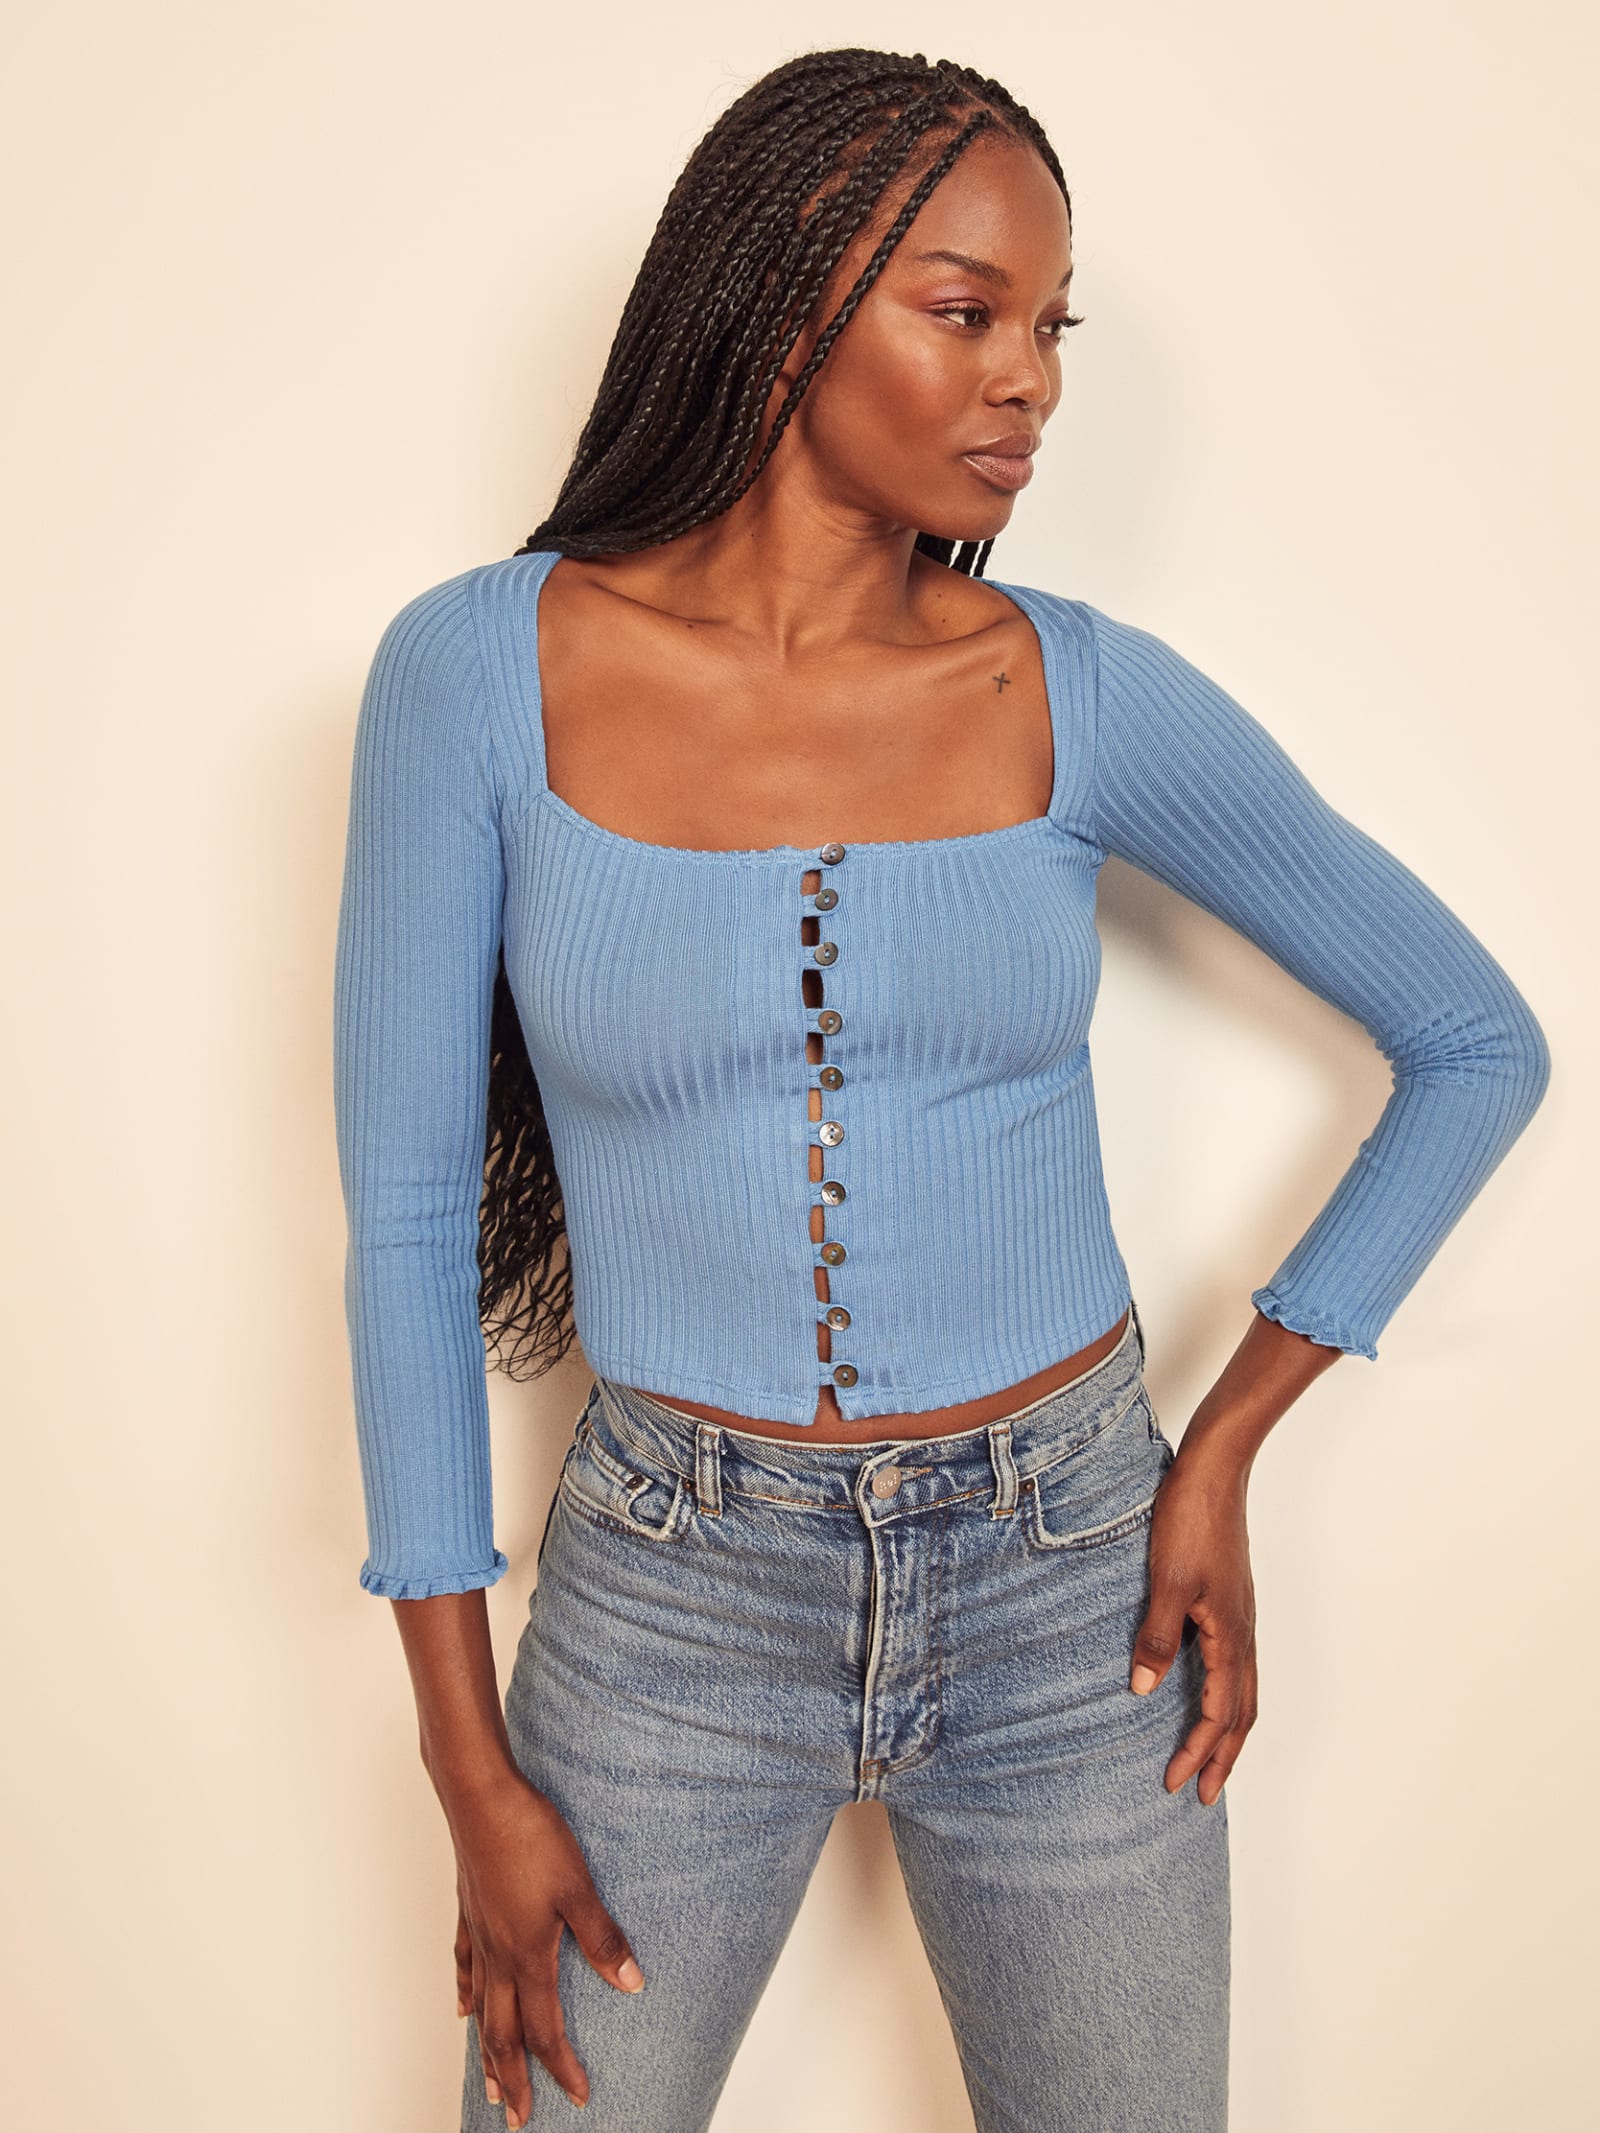 Kaisa Top - Long Sleeve Knit | Reformation